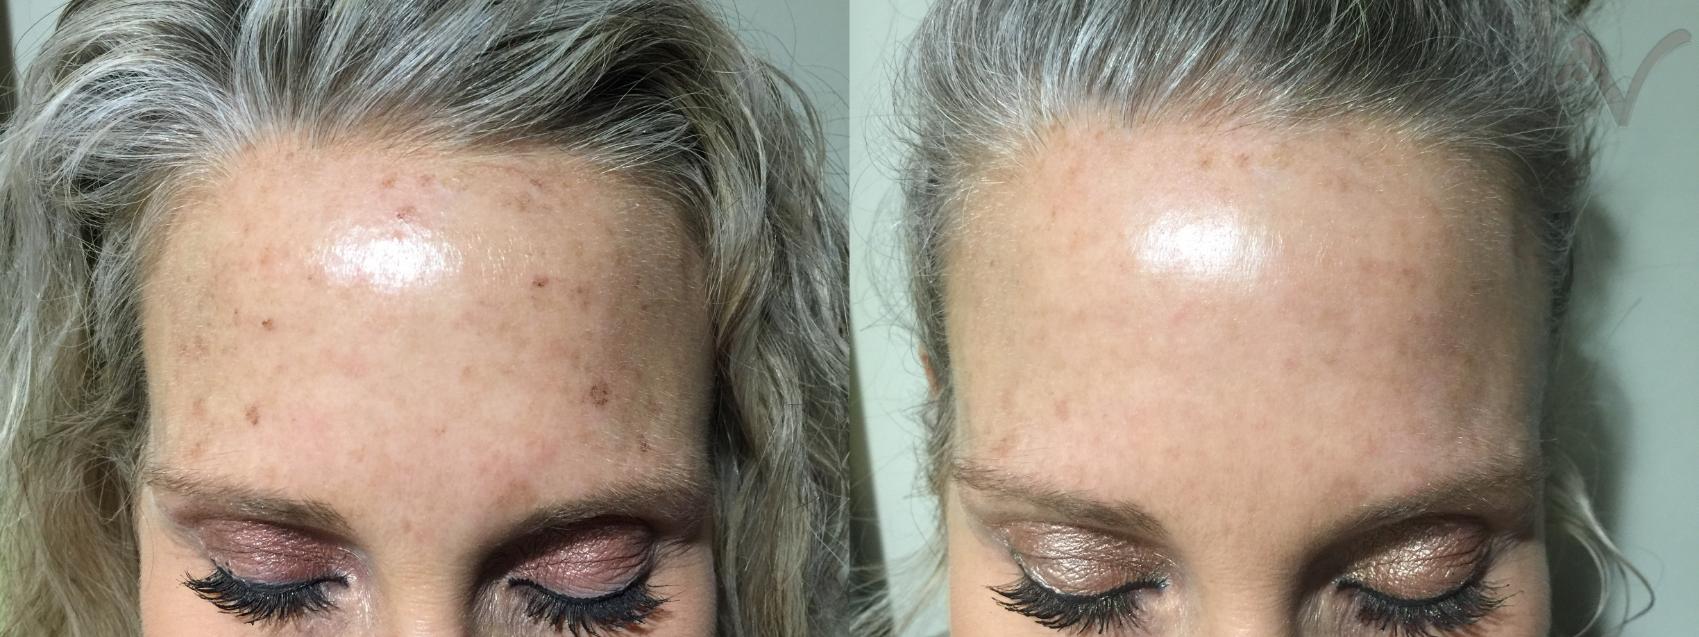 Before & After PicoSure Skin Rejuvenation Case 25 Front View in Burbank, CA